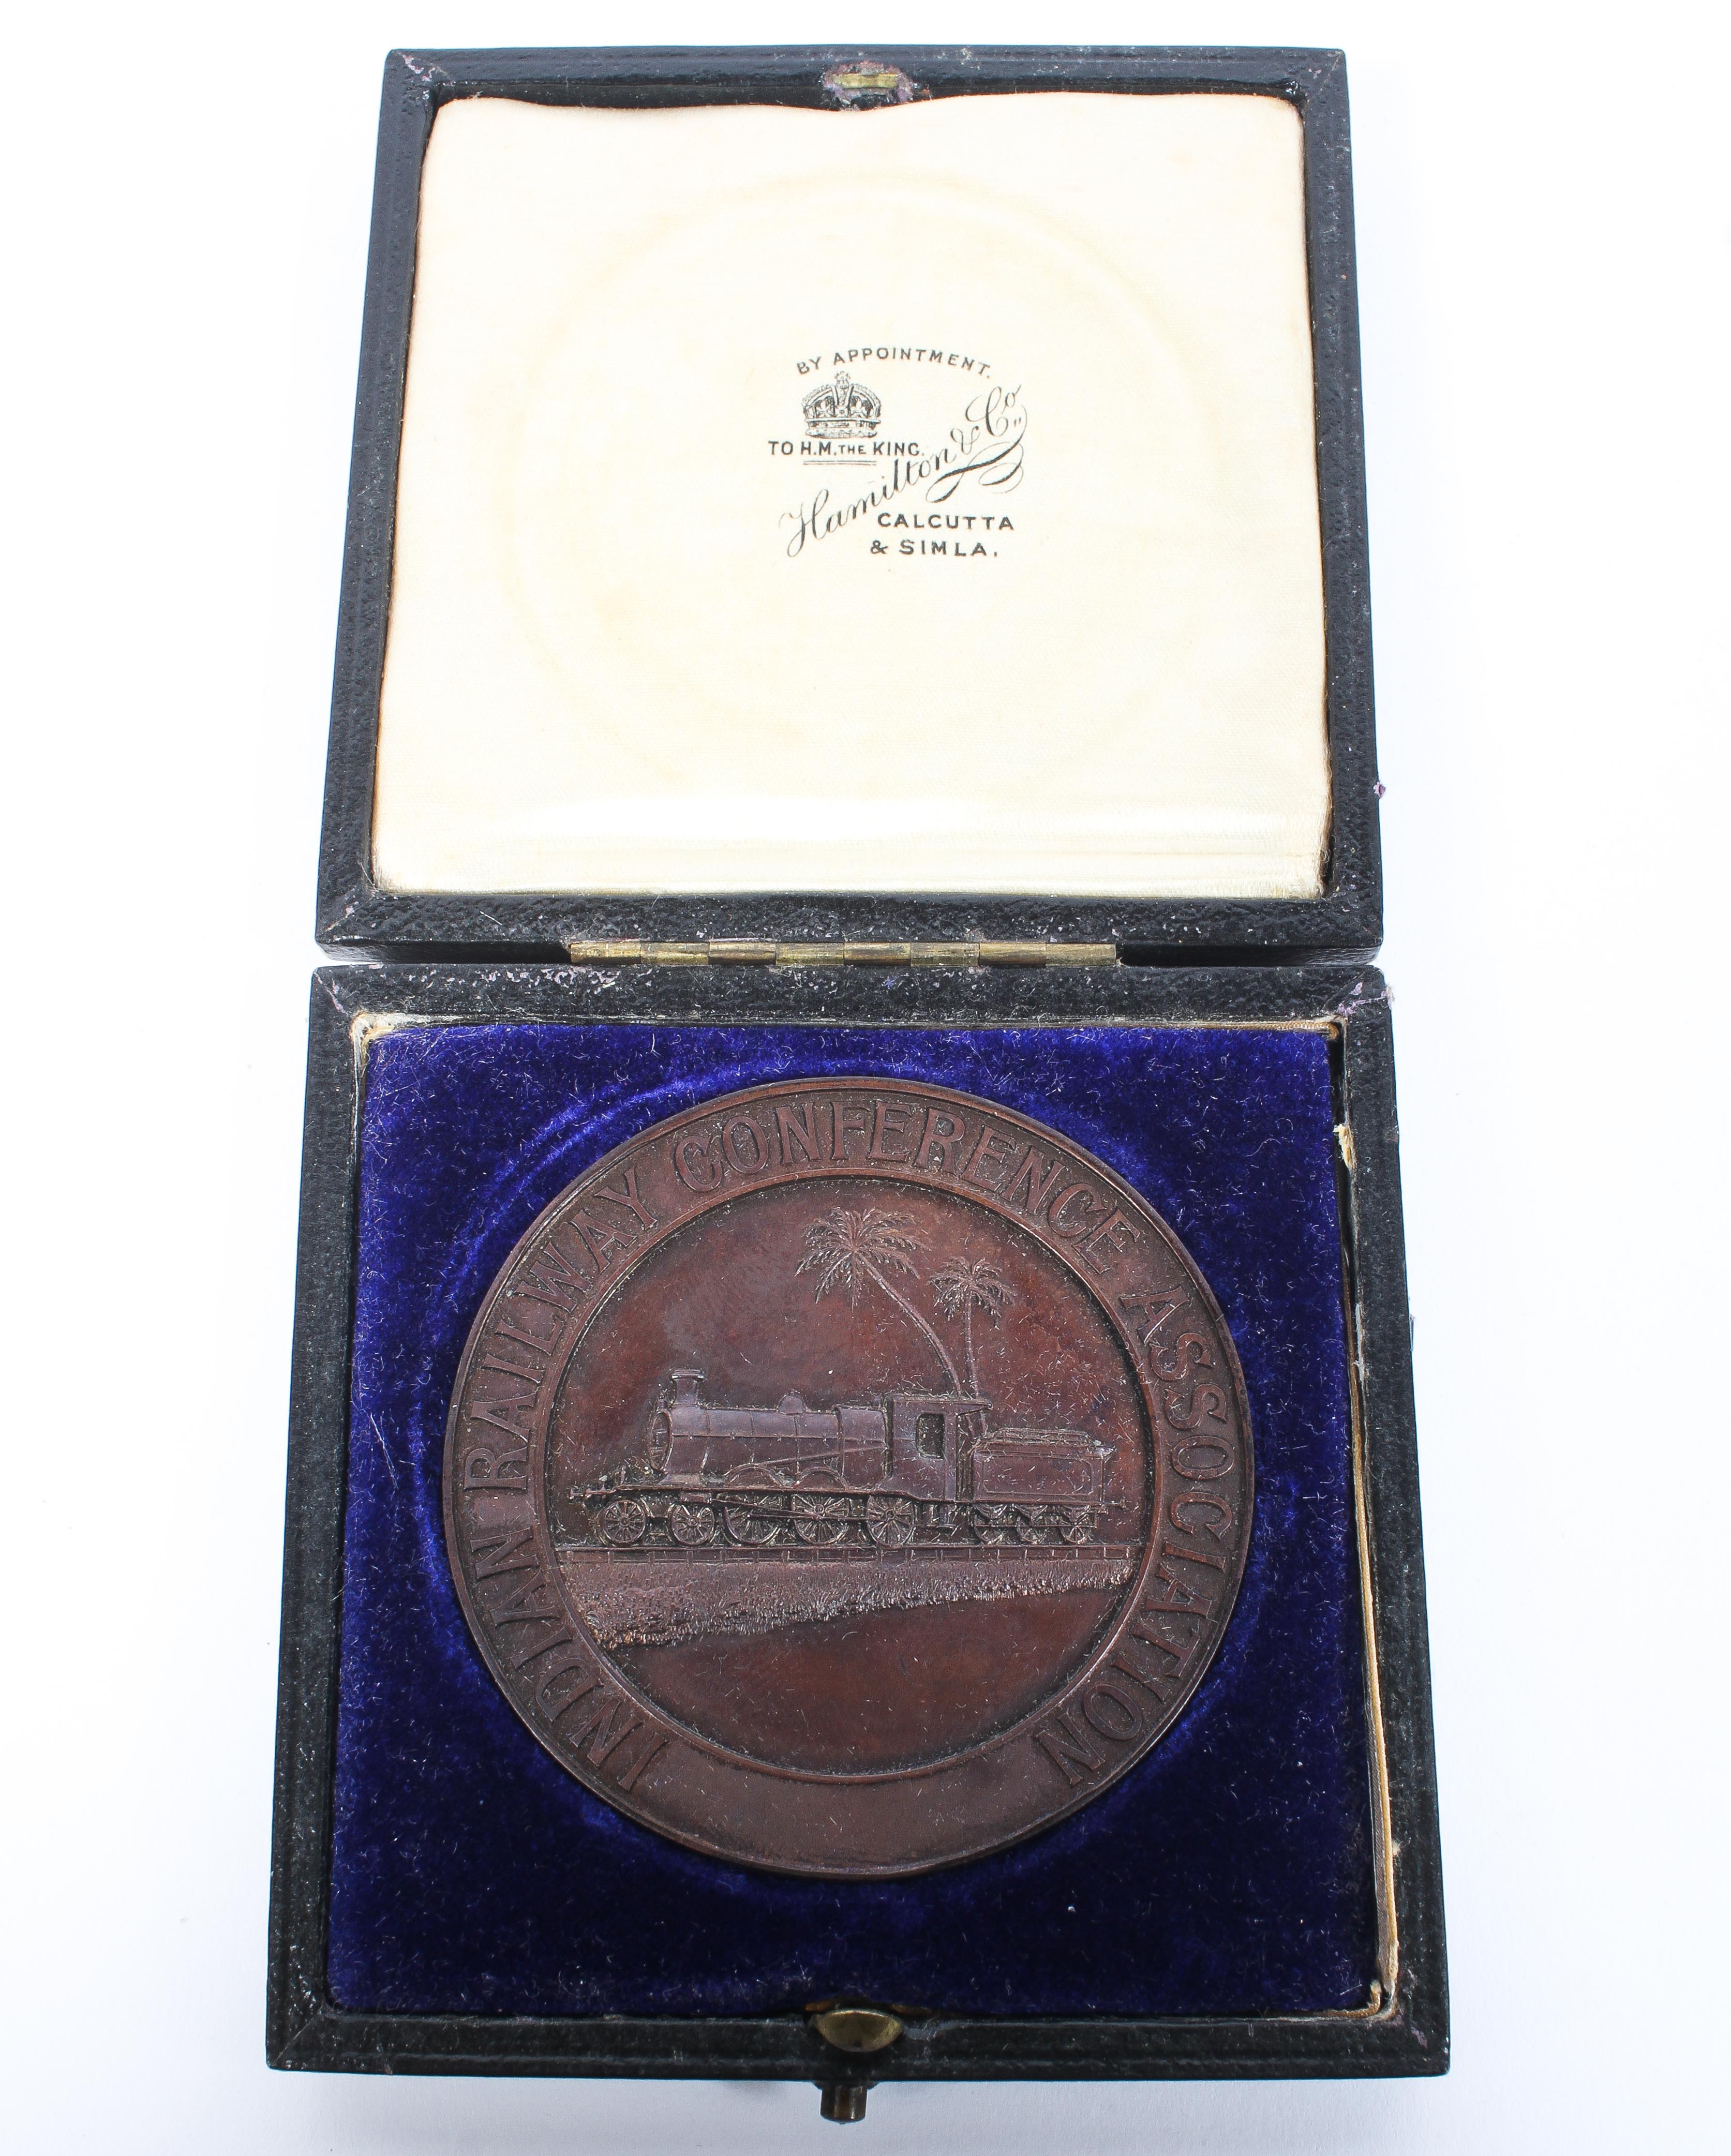 A bronze 3rd place medal struck for Indian Railway Conference Association. - Image 2 of 4